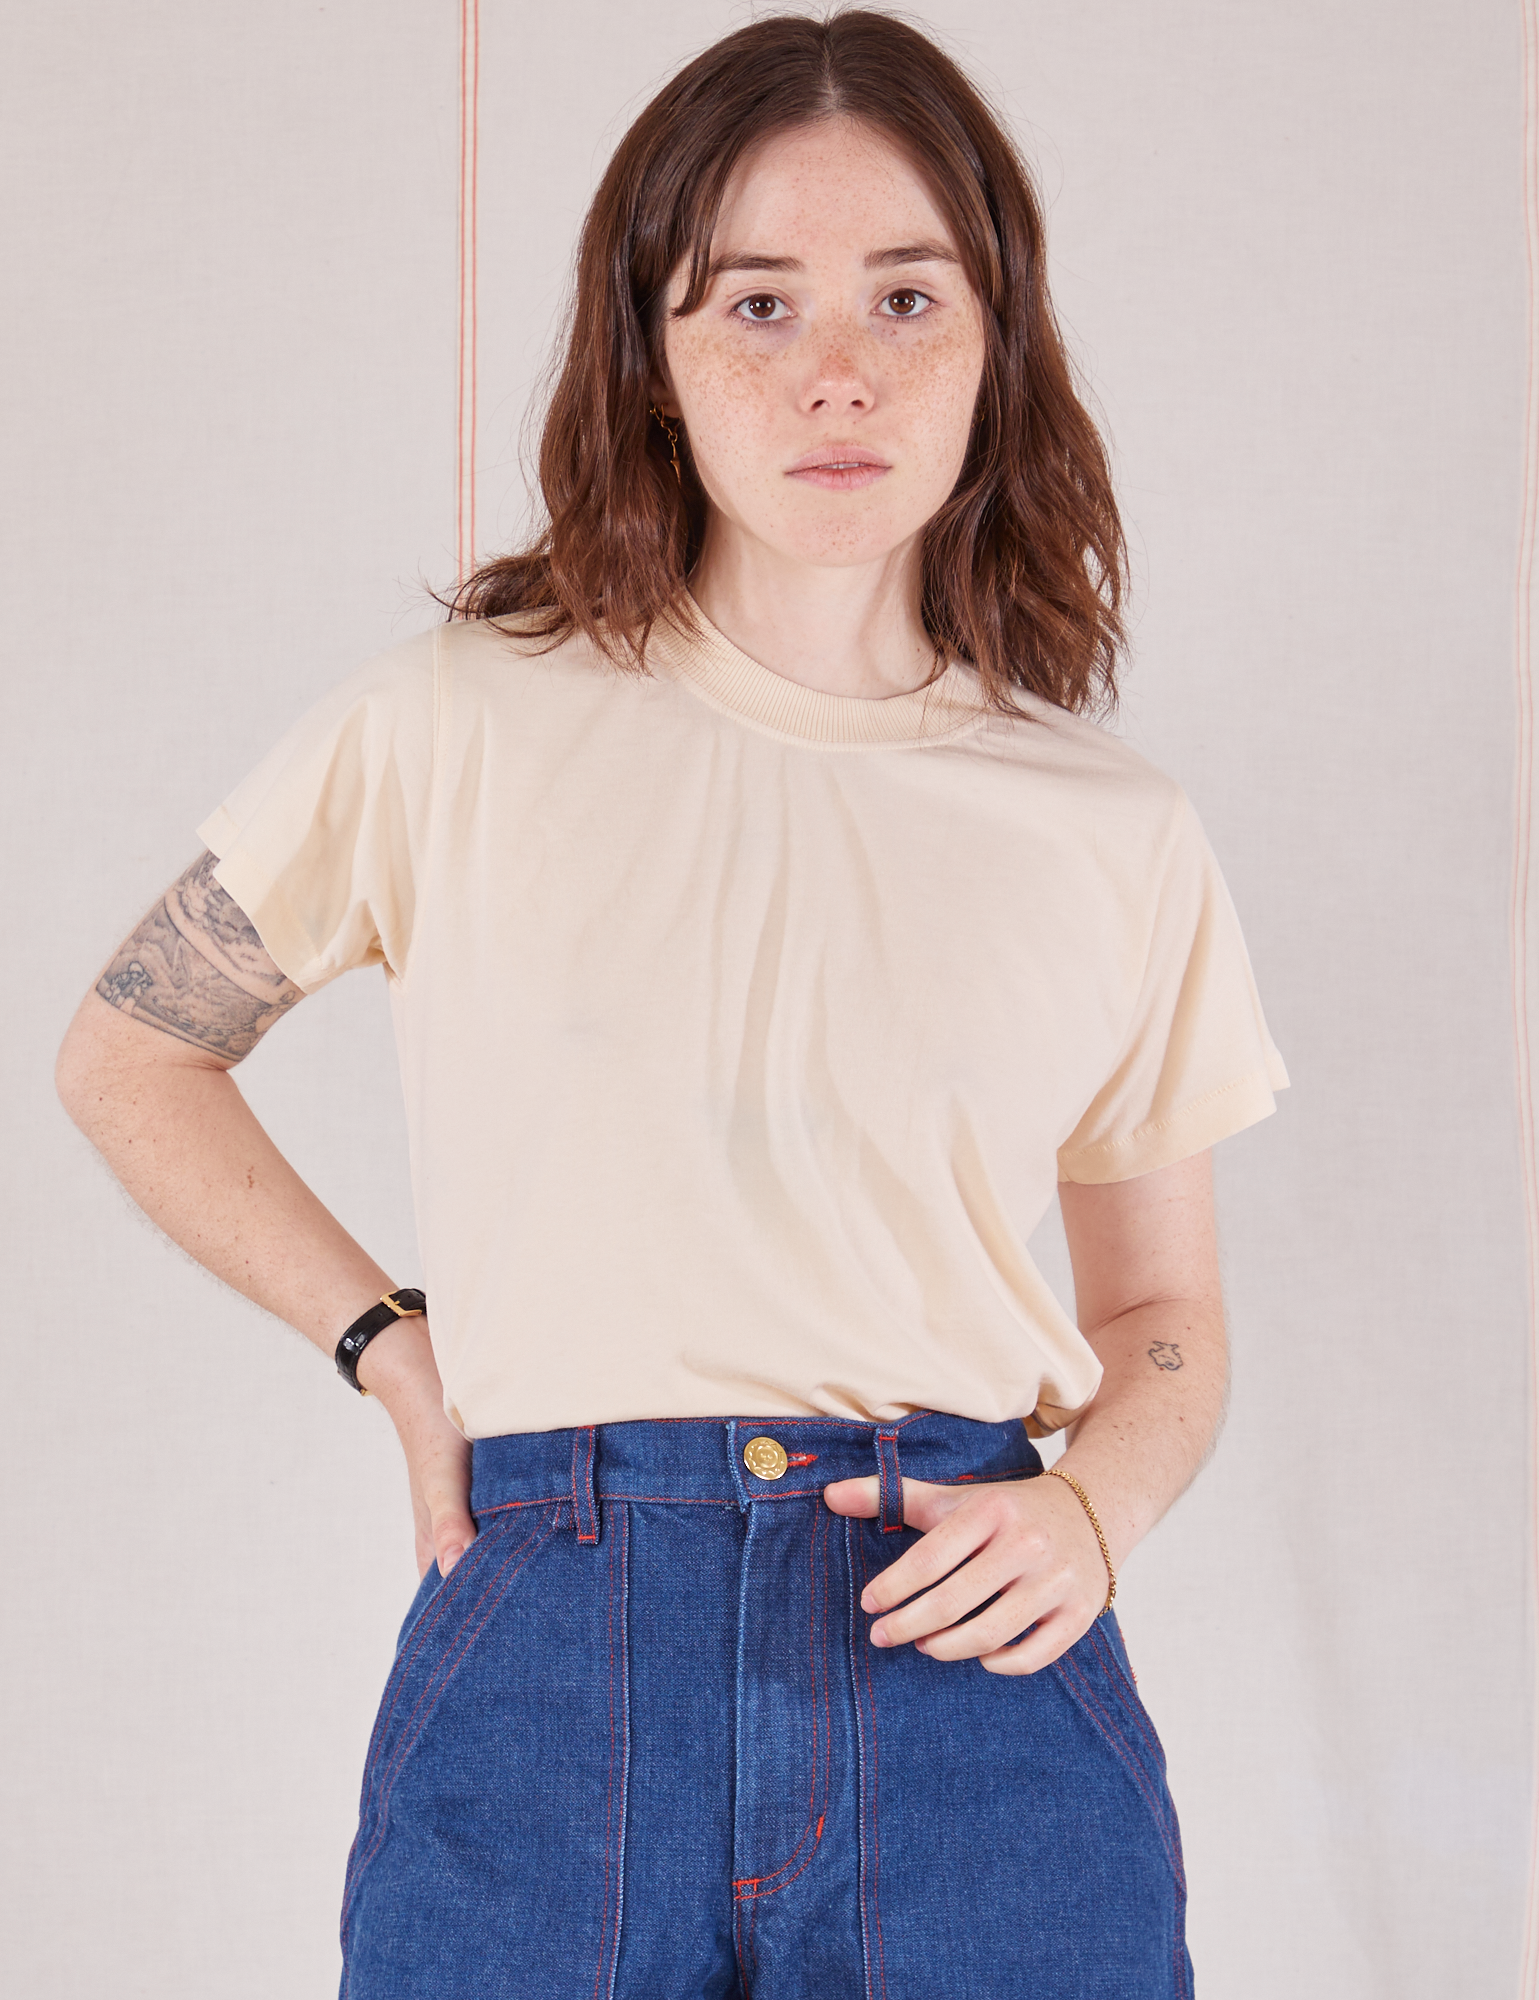 Hana is 5&#39;3&quot; and wearing P Organic Vintage Tee in Vintage Tee Off-White tucked into dark wash Carpenter Jeans